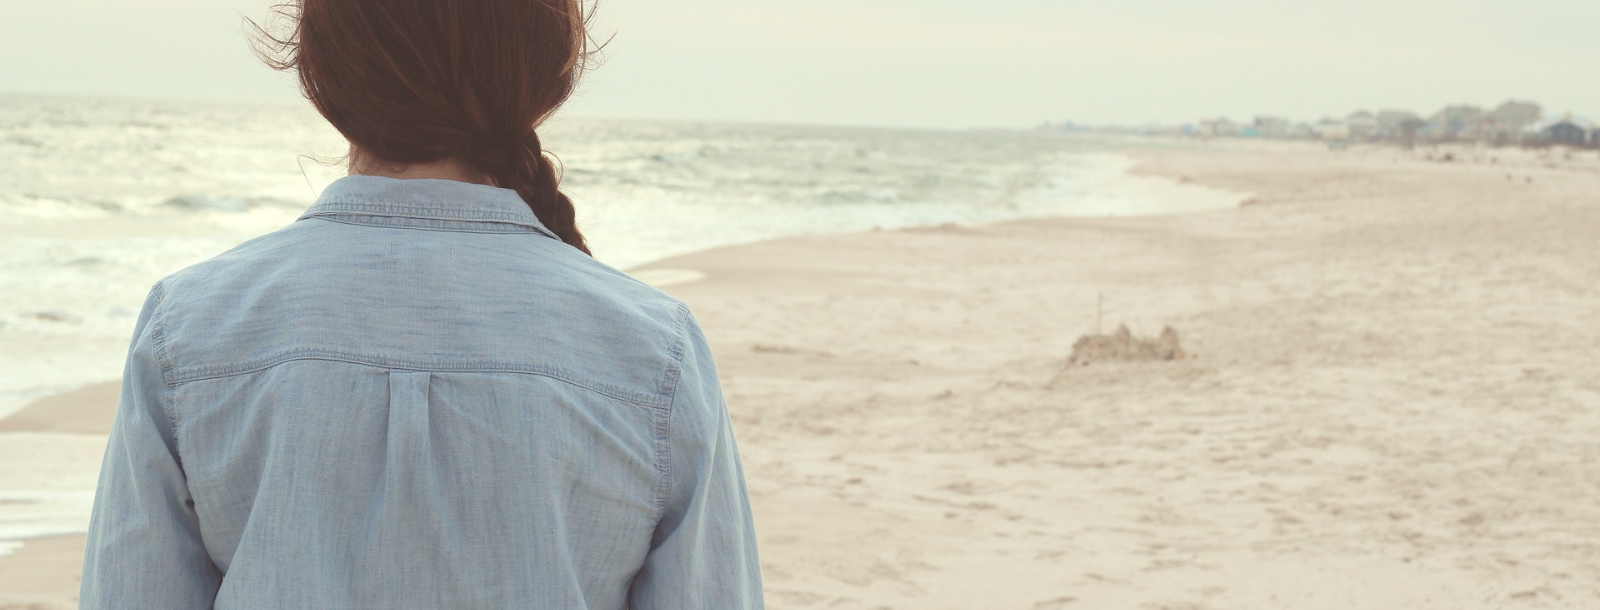 woman walking at beach feeling pressured by other people